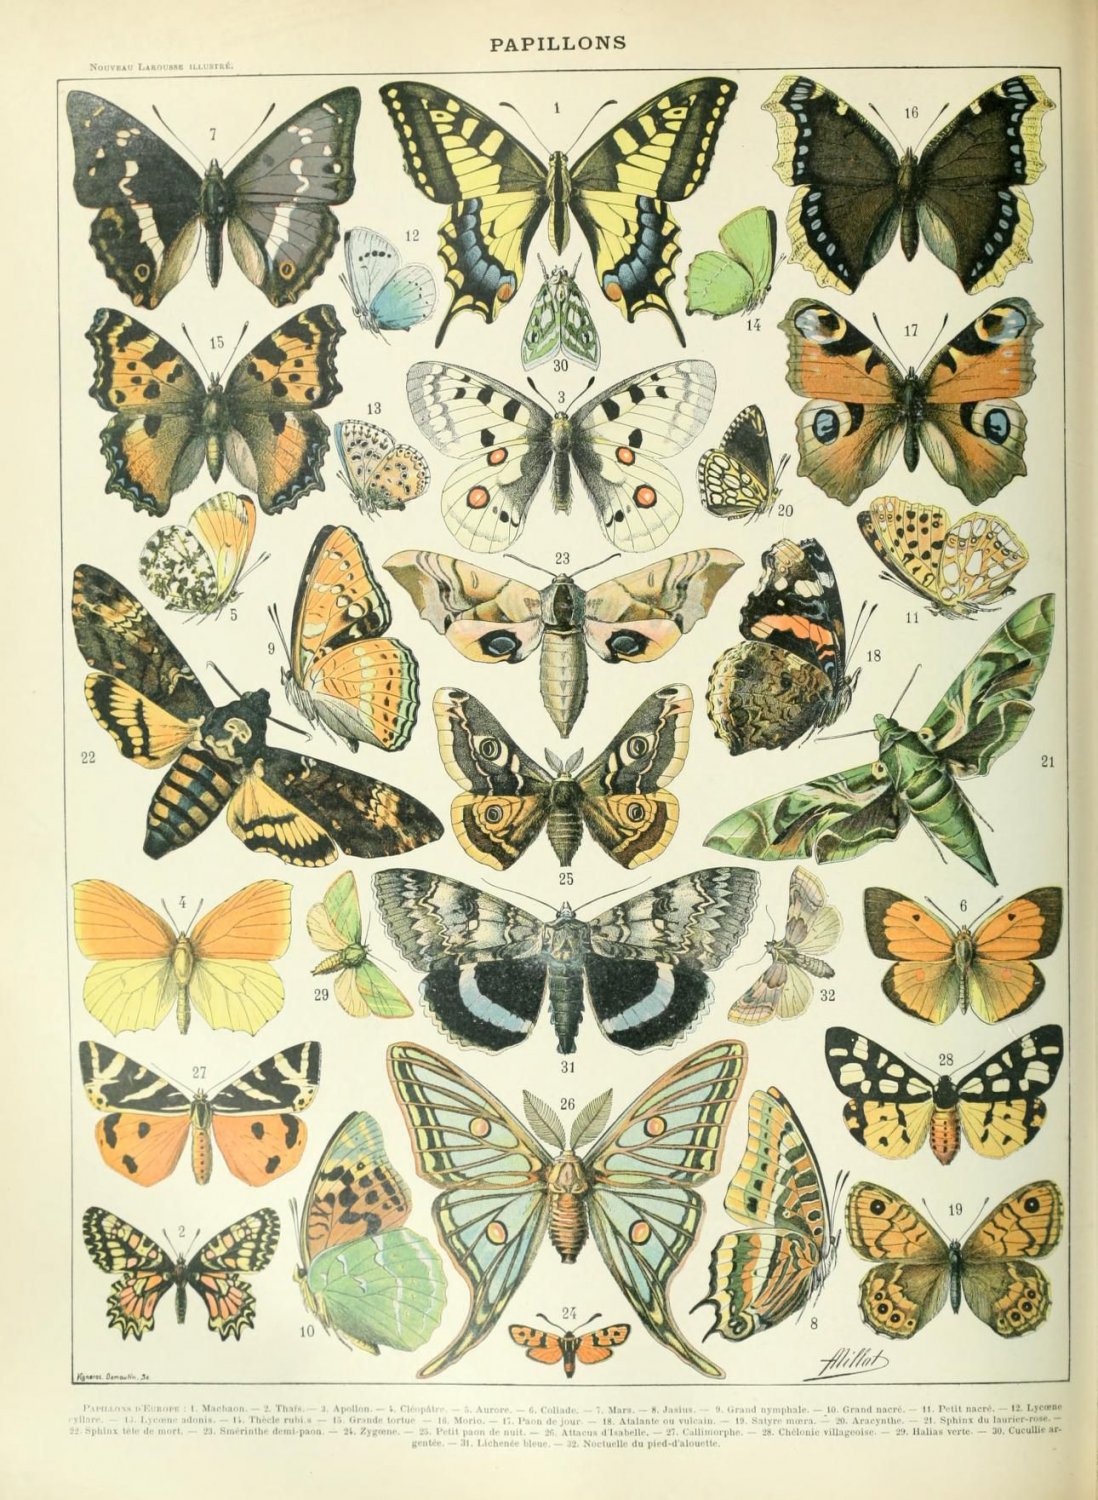 Different Types of Insects Butterflies Papillon Chart  18"x28" (45cm/70cm) Canvas Print